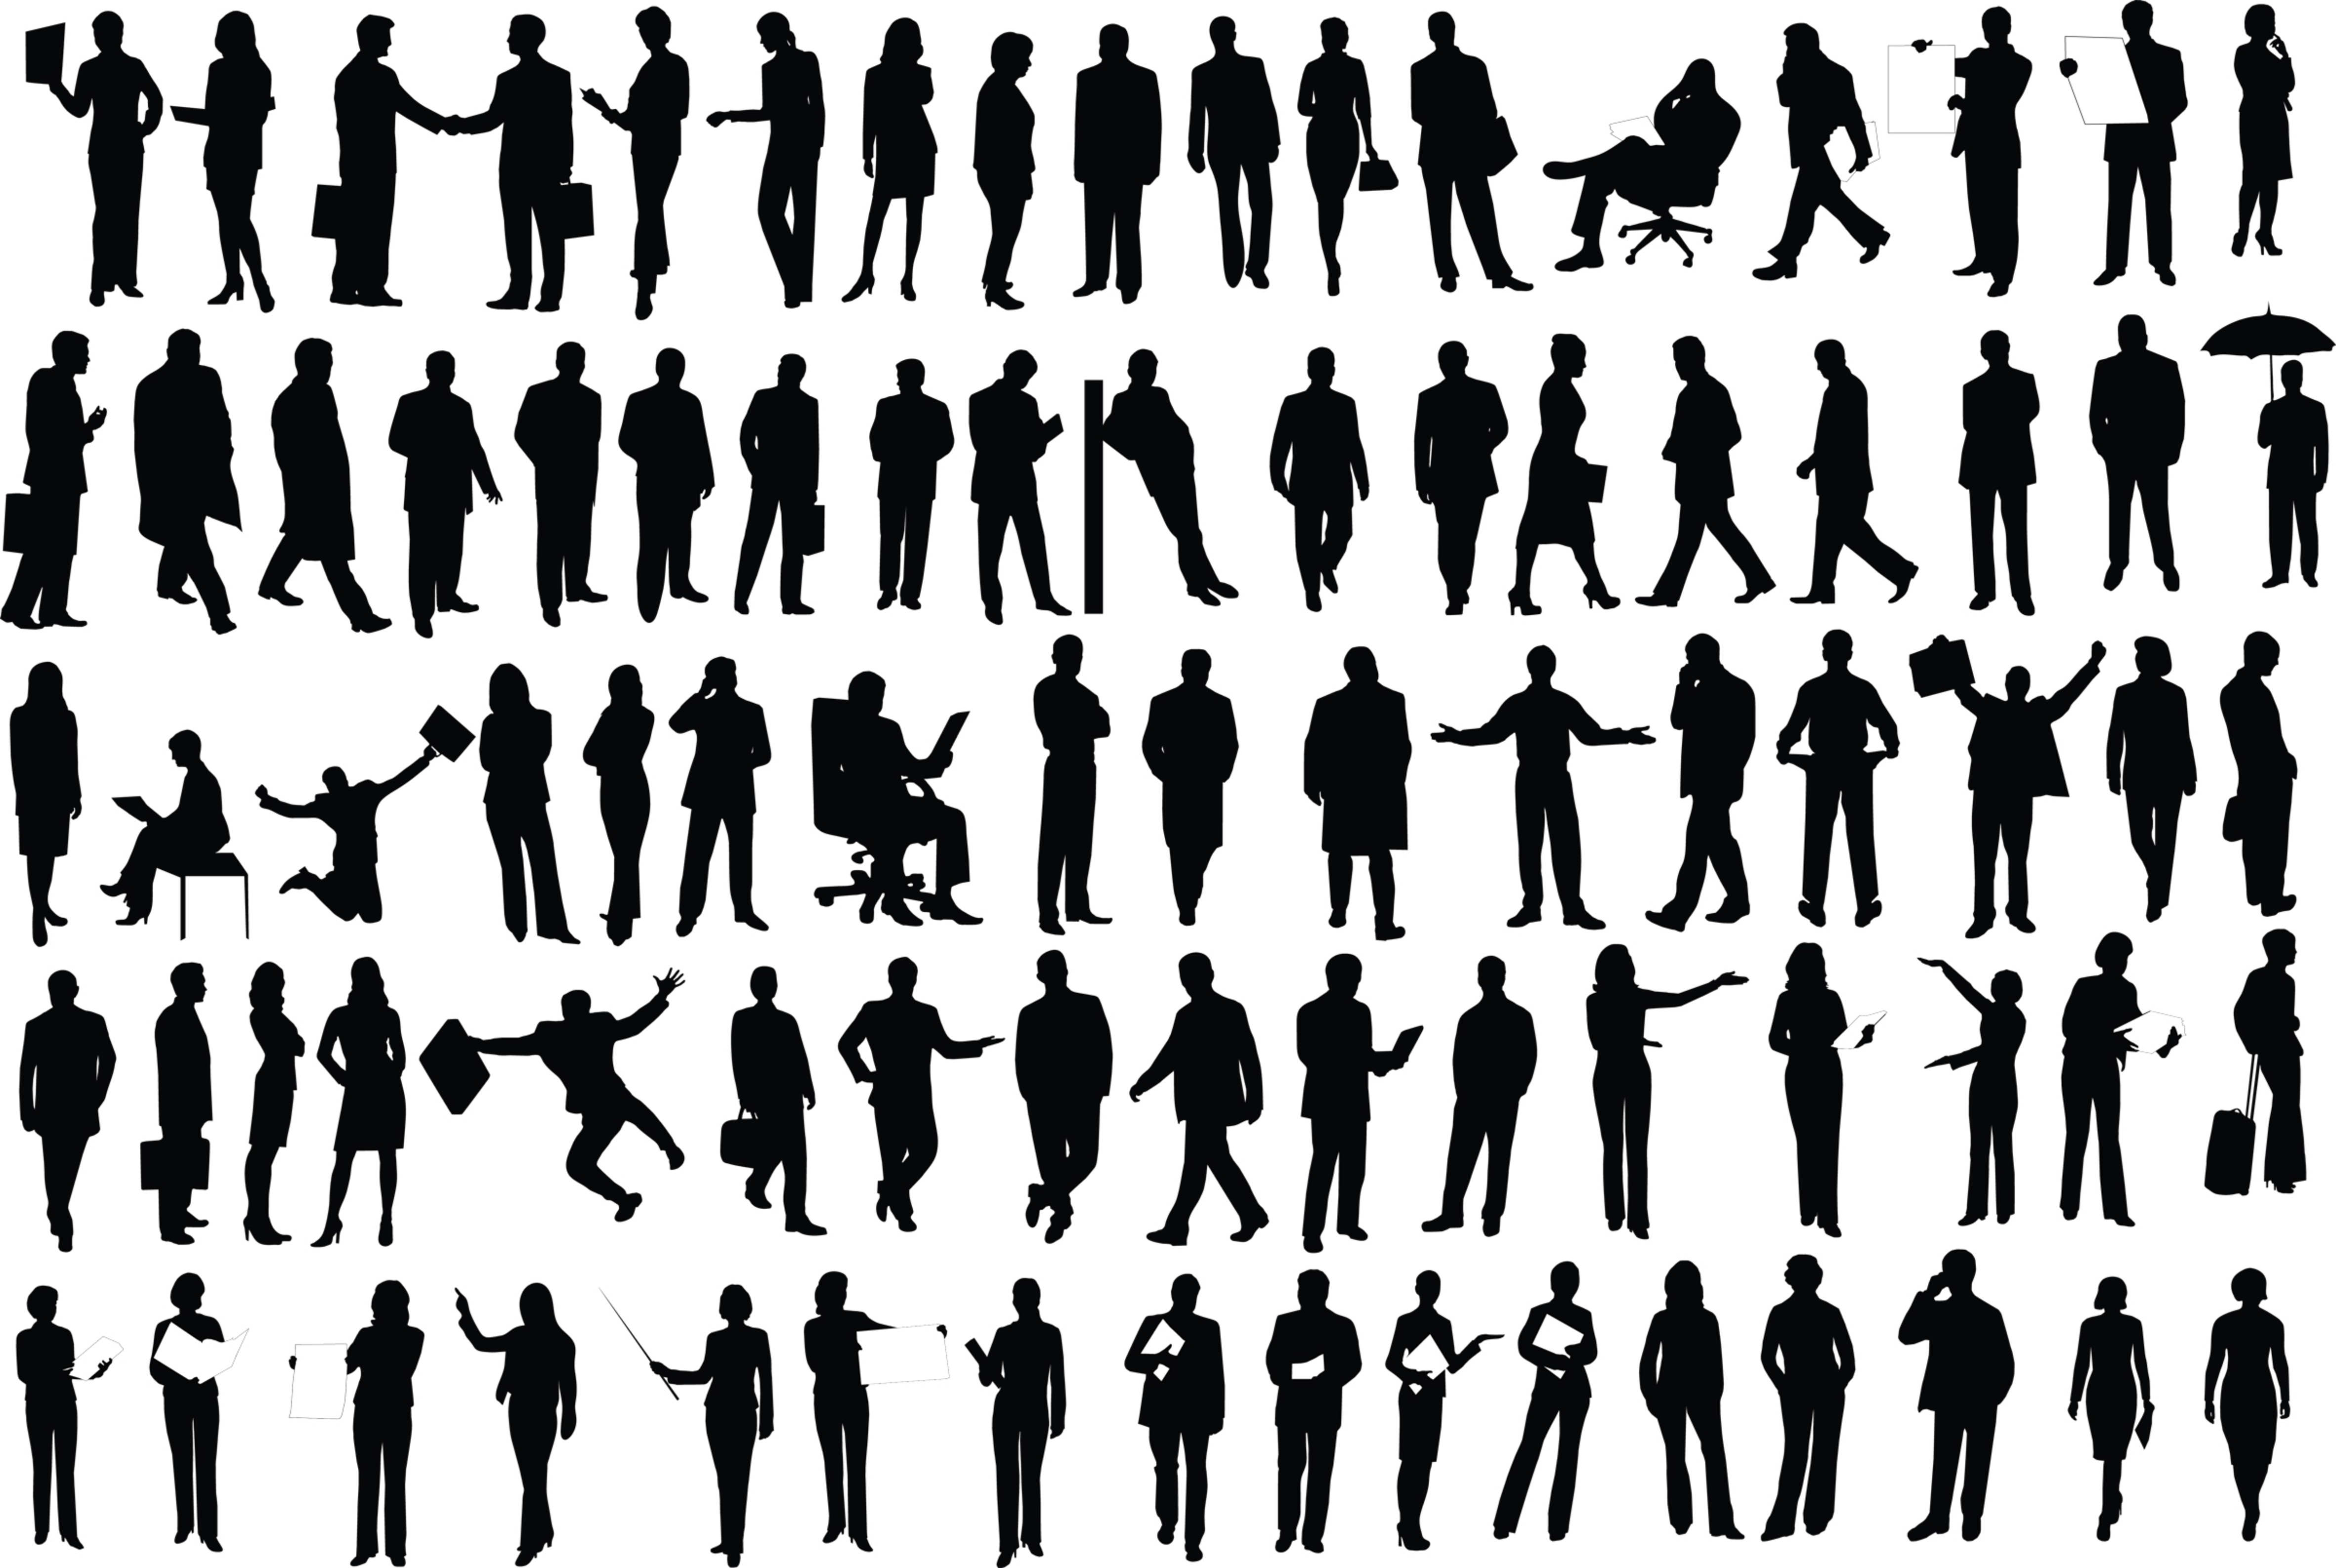 14 Human Silhouette Vector Images Human Silhouette